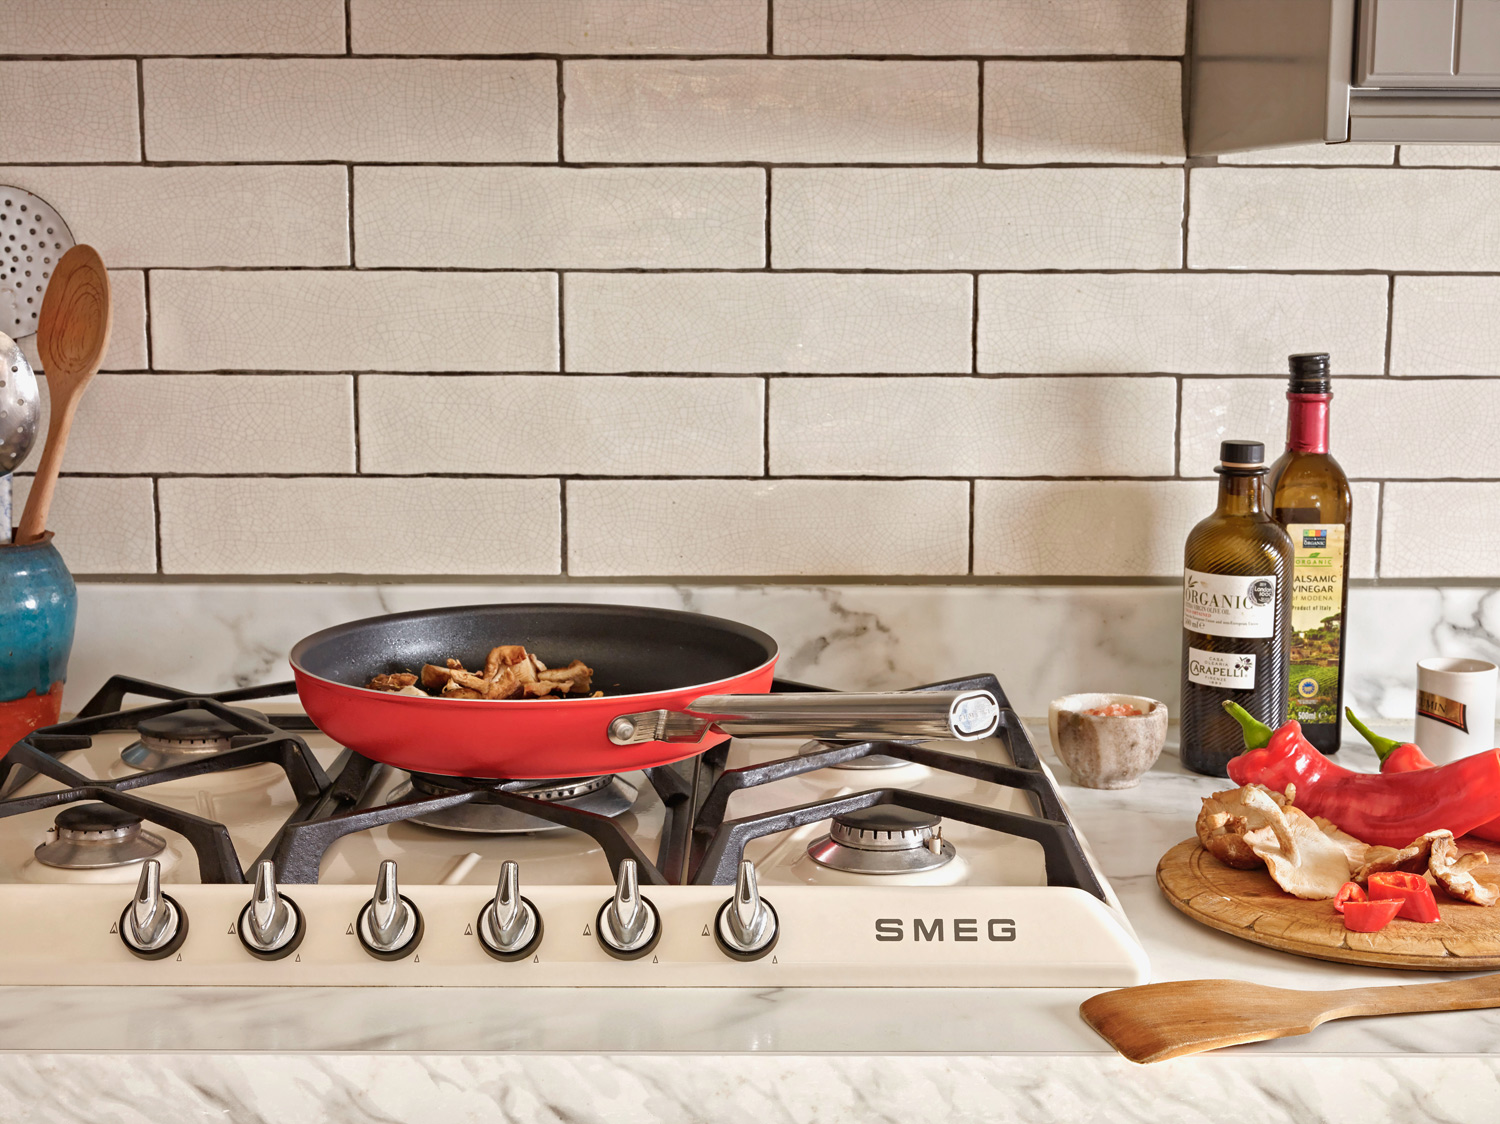 Smeg's New Cookware Range Brings Some Italian Flair Into The Kitchen